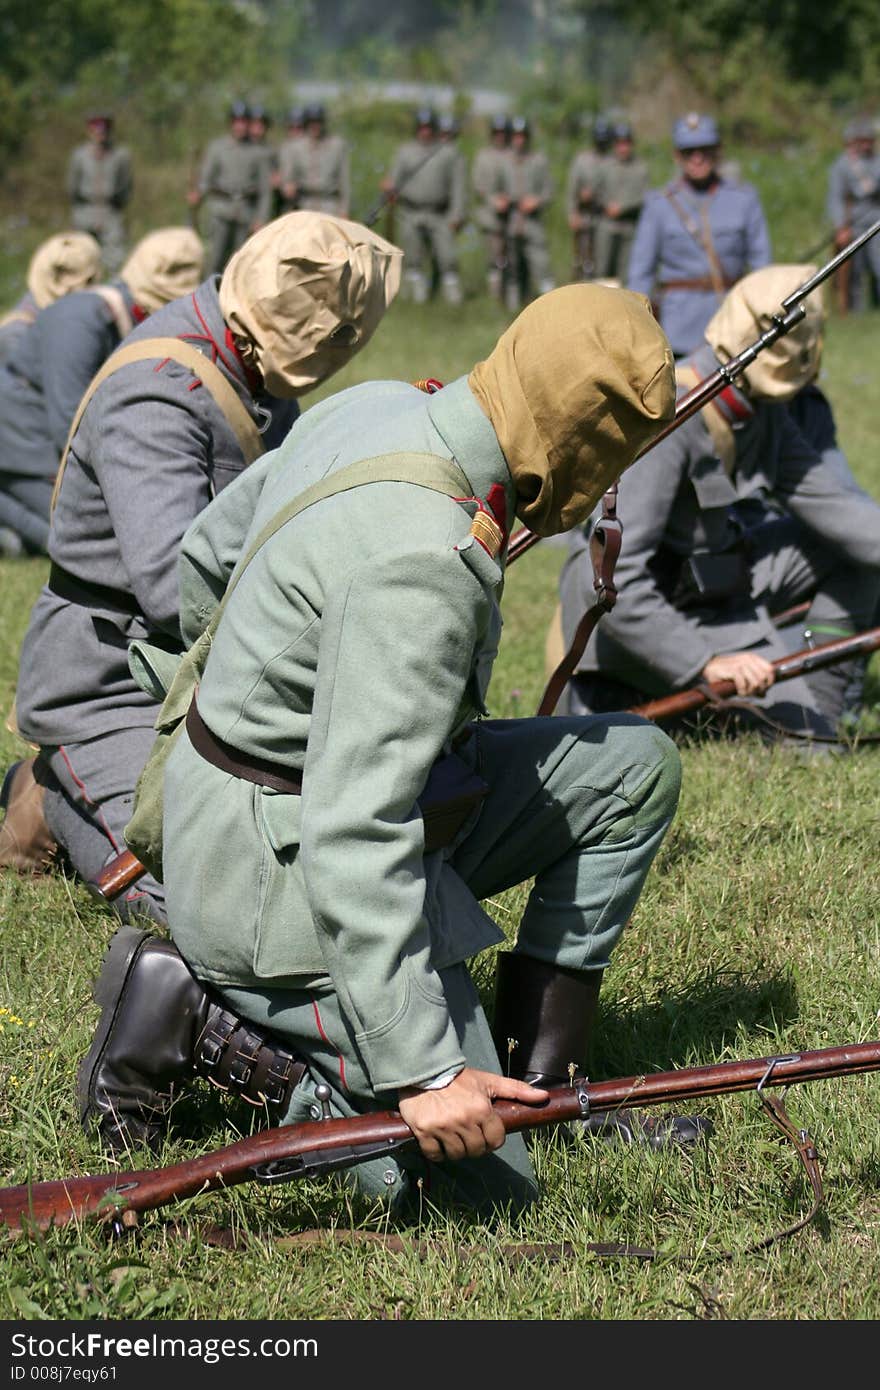 Soldiers with gas mask in battle demonstrative show from first world war. Soldiers with gas mask in battle demonstrative show from first world war